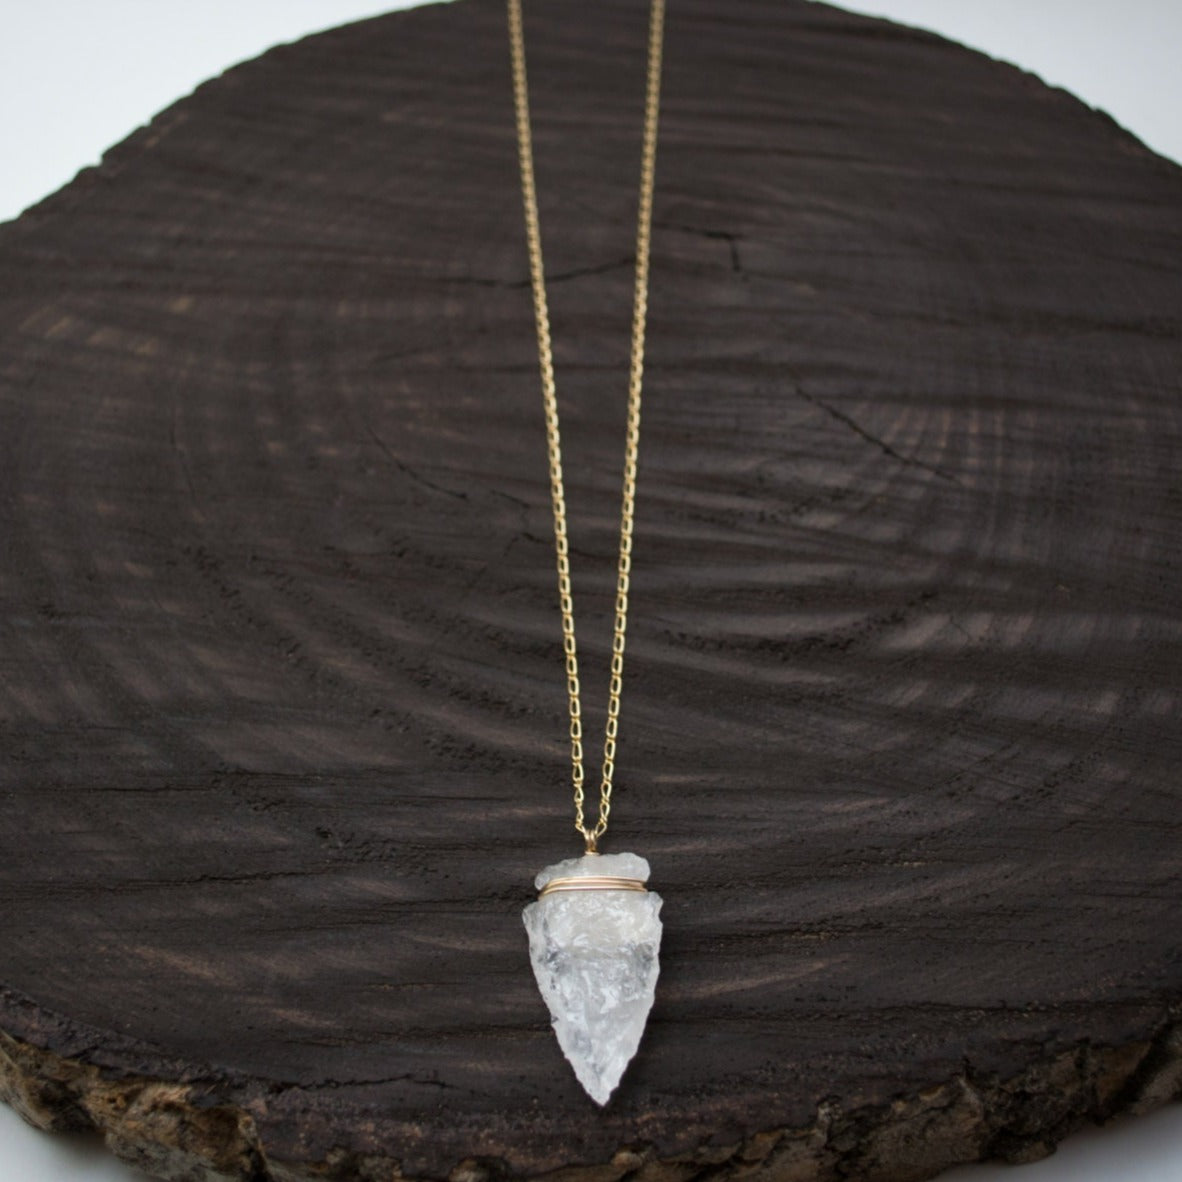 Elevate your style with the Althea Quartz Crystal Necklace, featuring a hand-knapped natural quartz crystal arrowhead on a 14k gold-filled curb figaro chain.